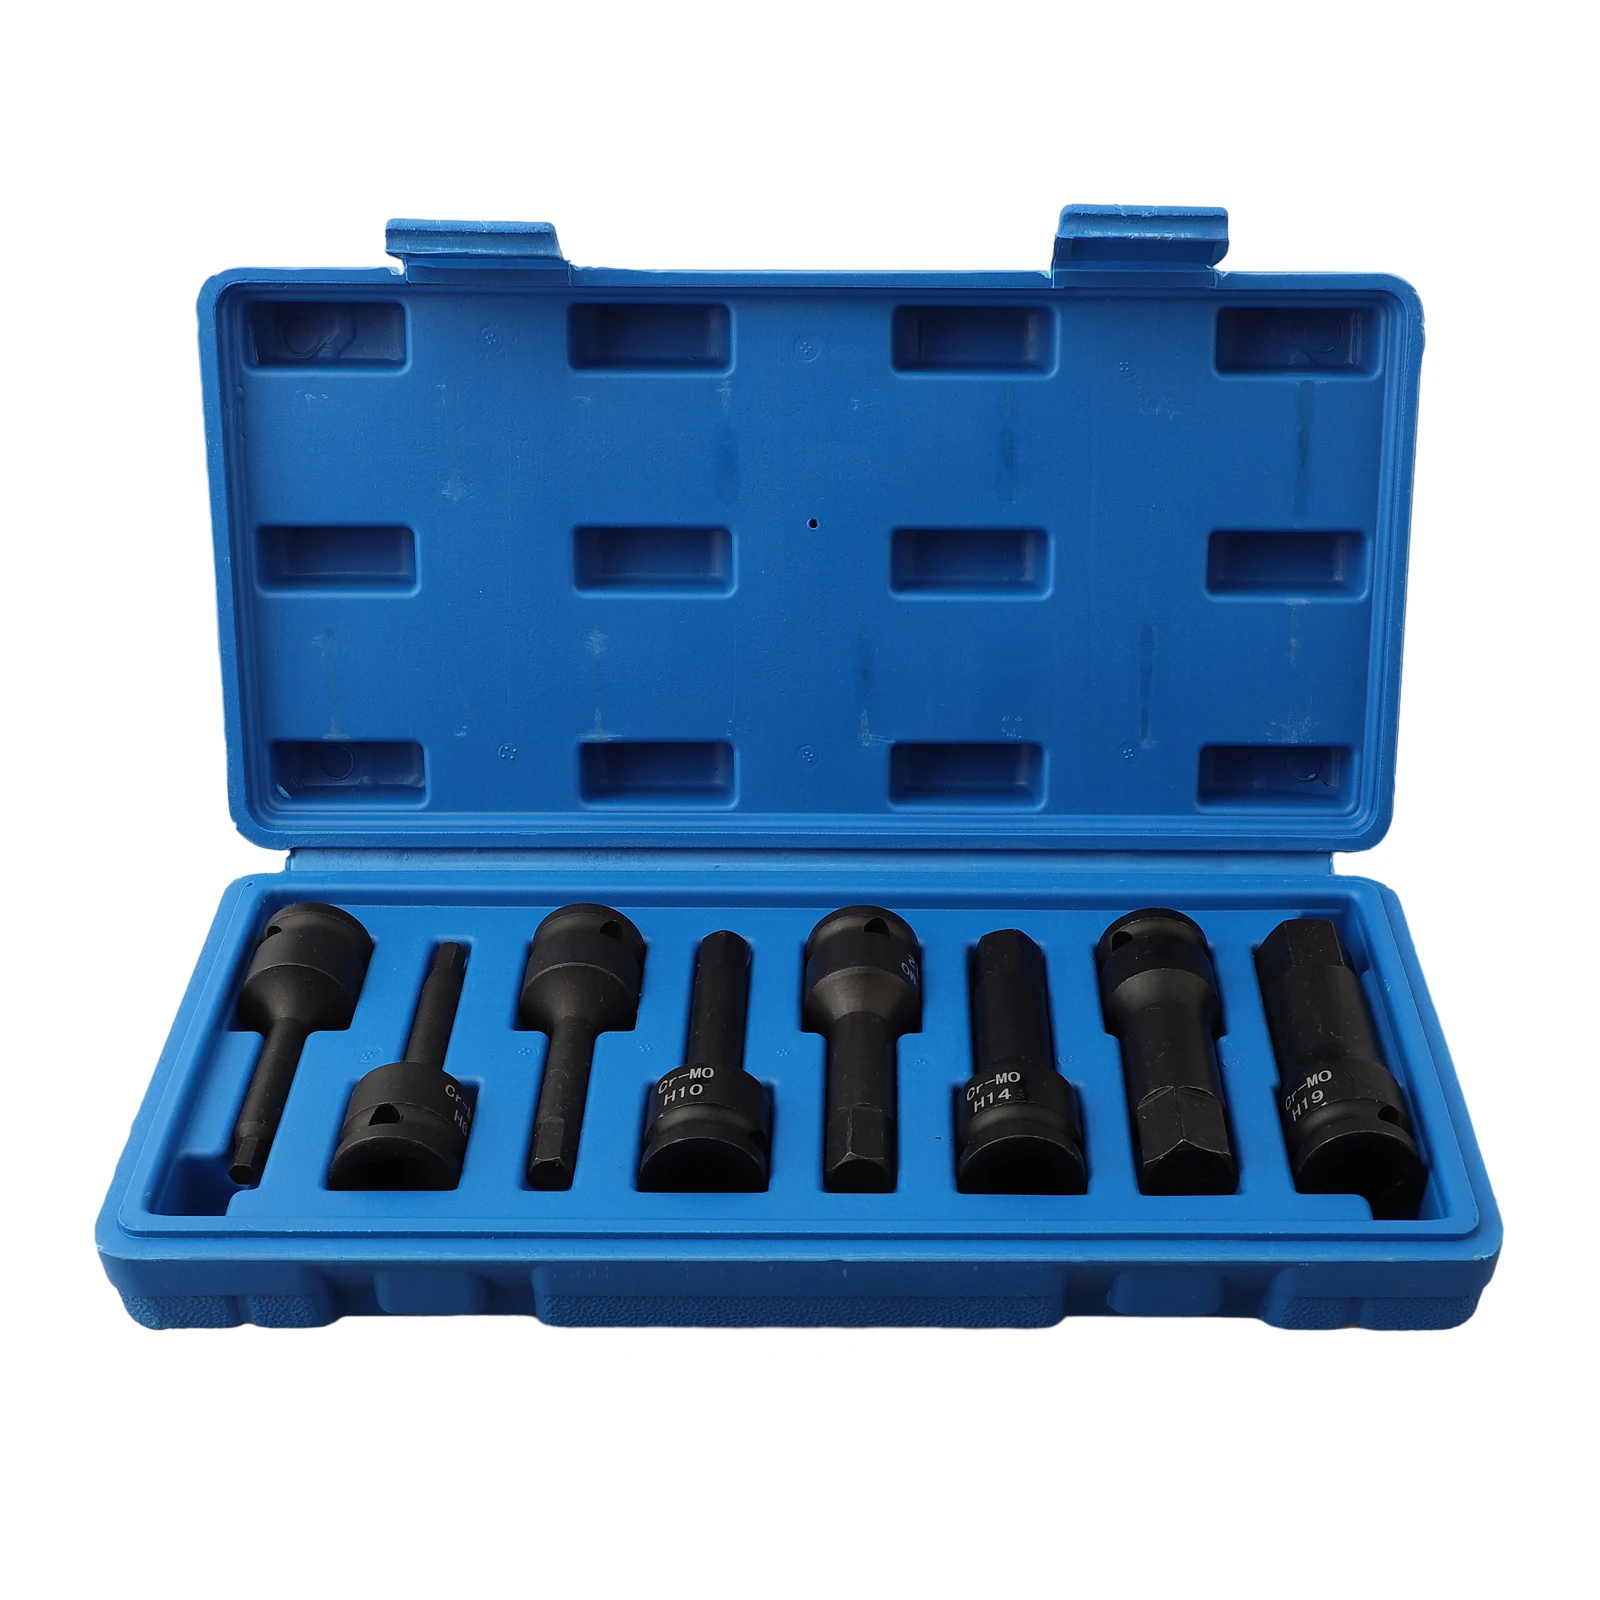 

8PCS 78mm 1/2inch Impact Drive Socket Wrench Hexagonal Screwdriver Metric H5-H19 Socket Wrenches Electric Wrench Power Tools